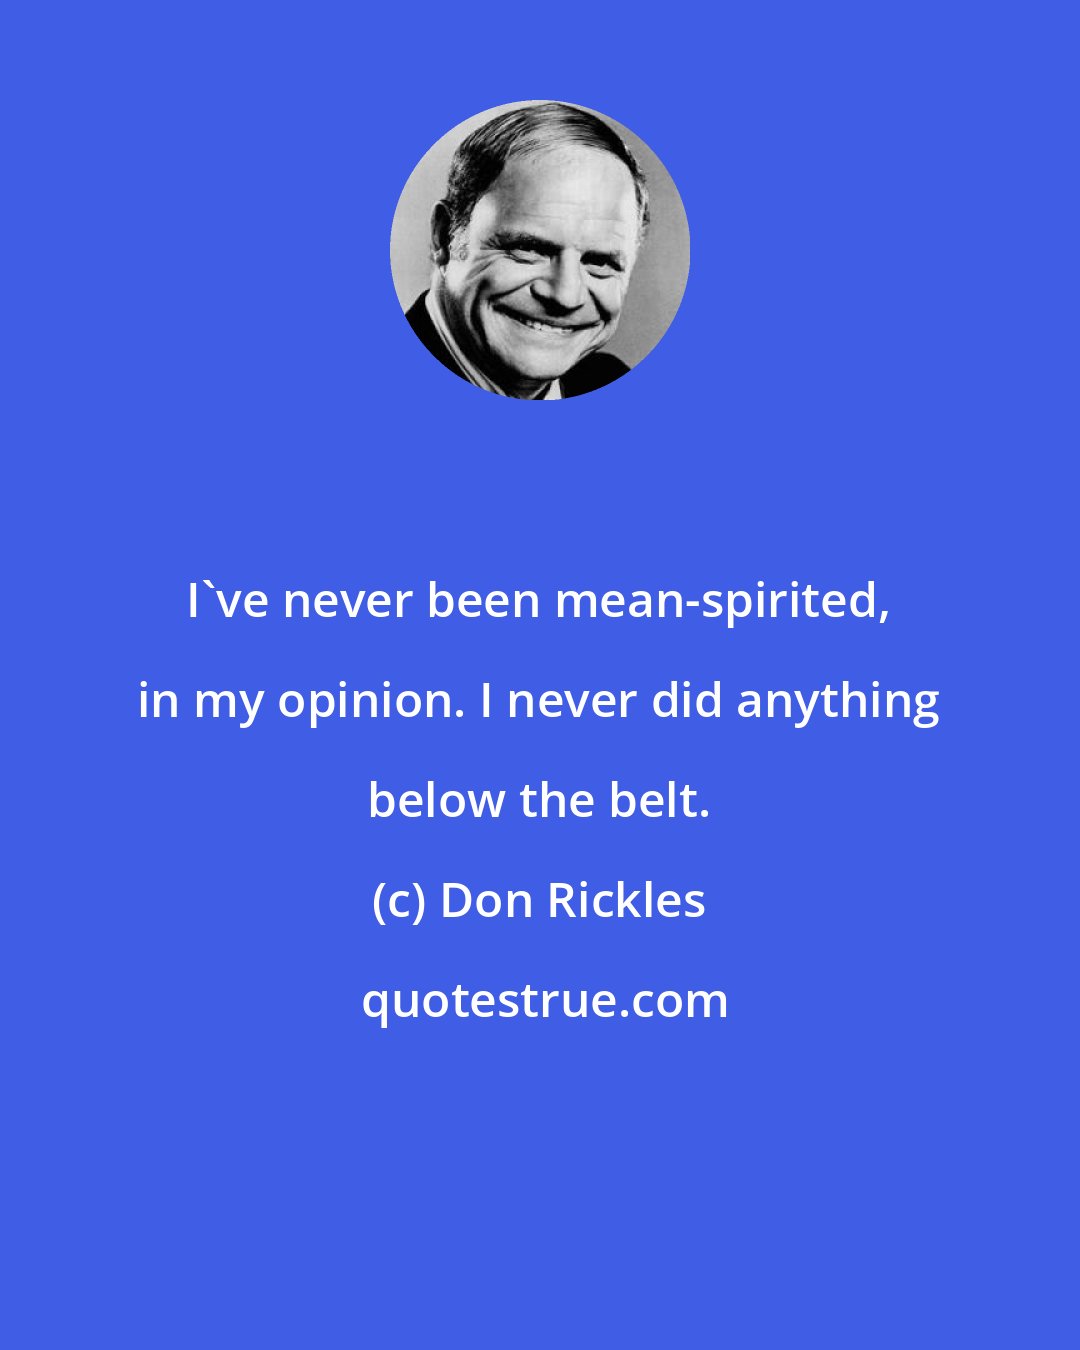 Don Rickles: I've never been mean-spirited, in my opinion. I never did anything below the belt.